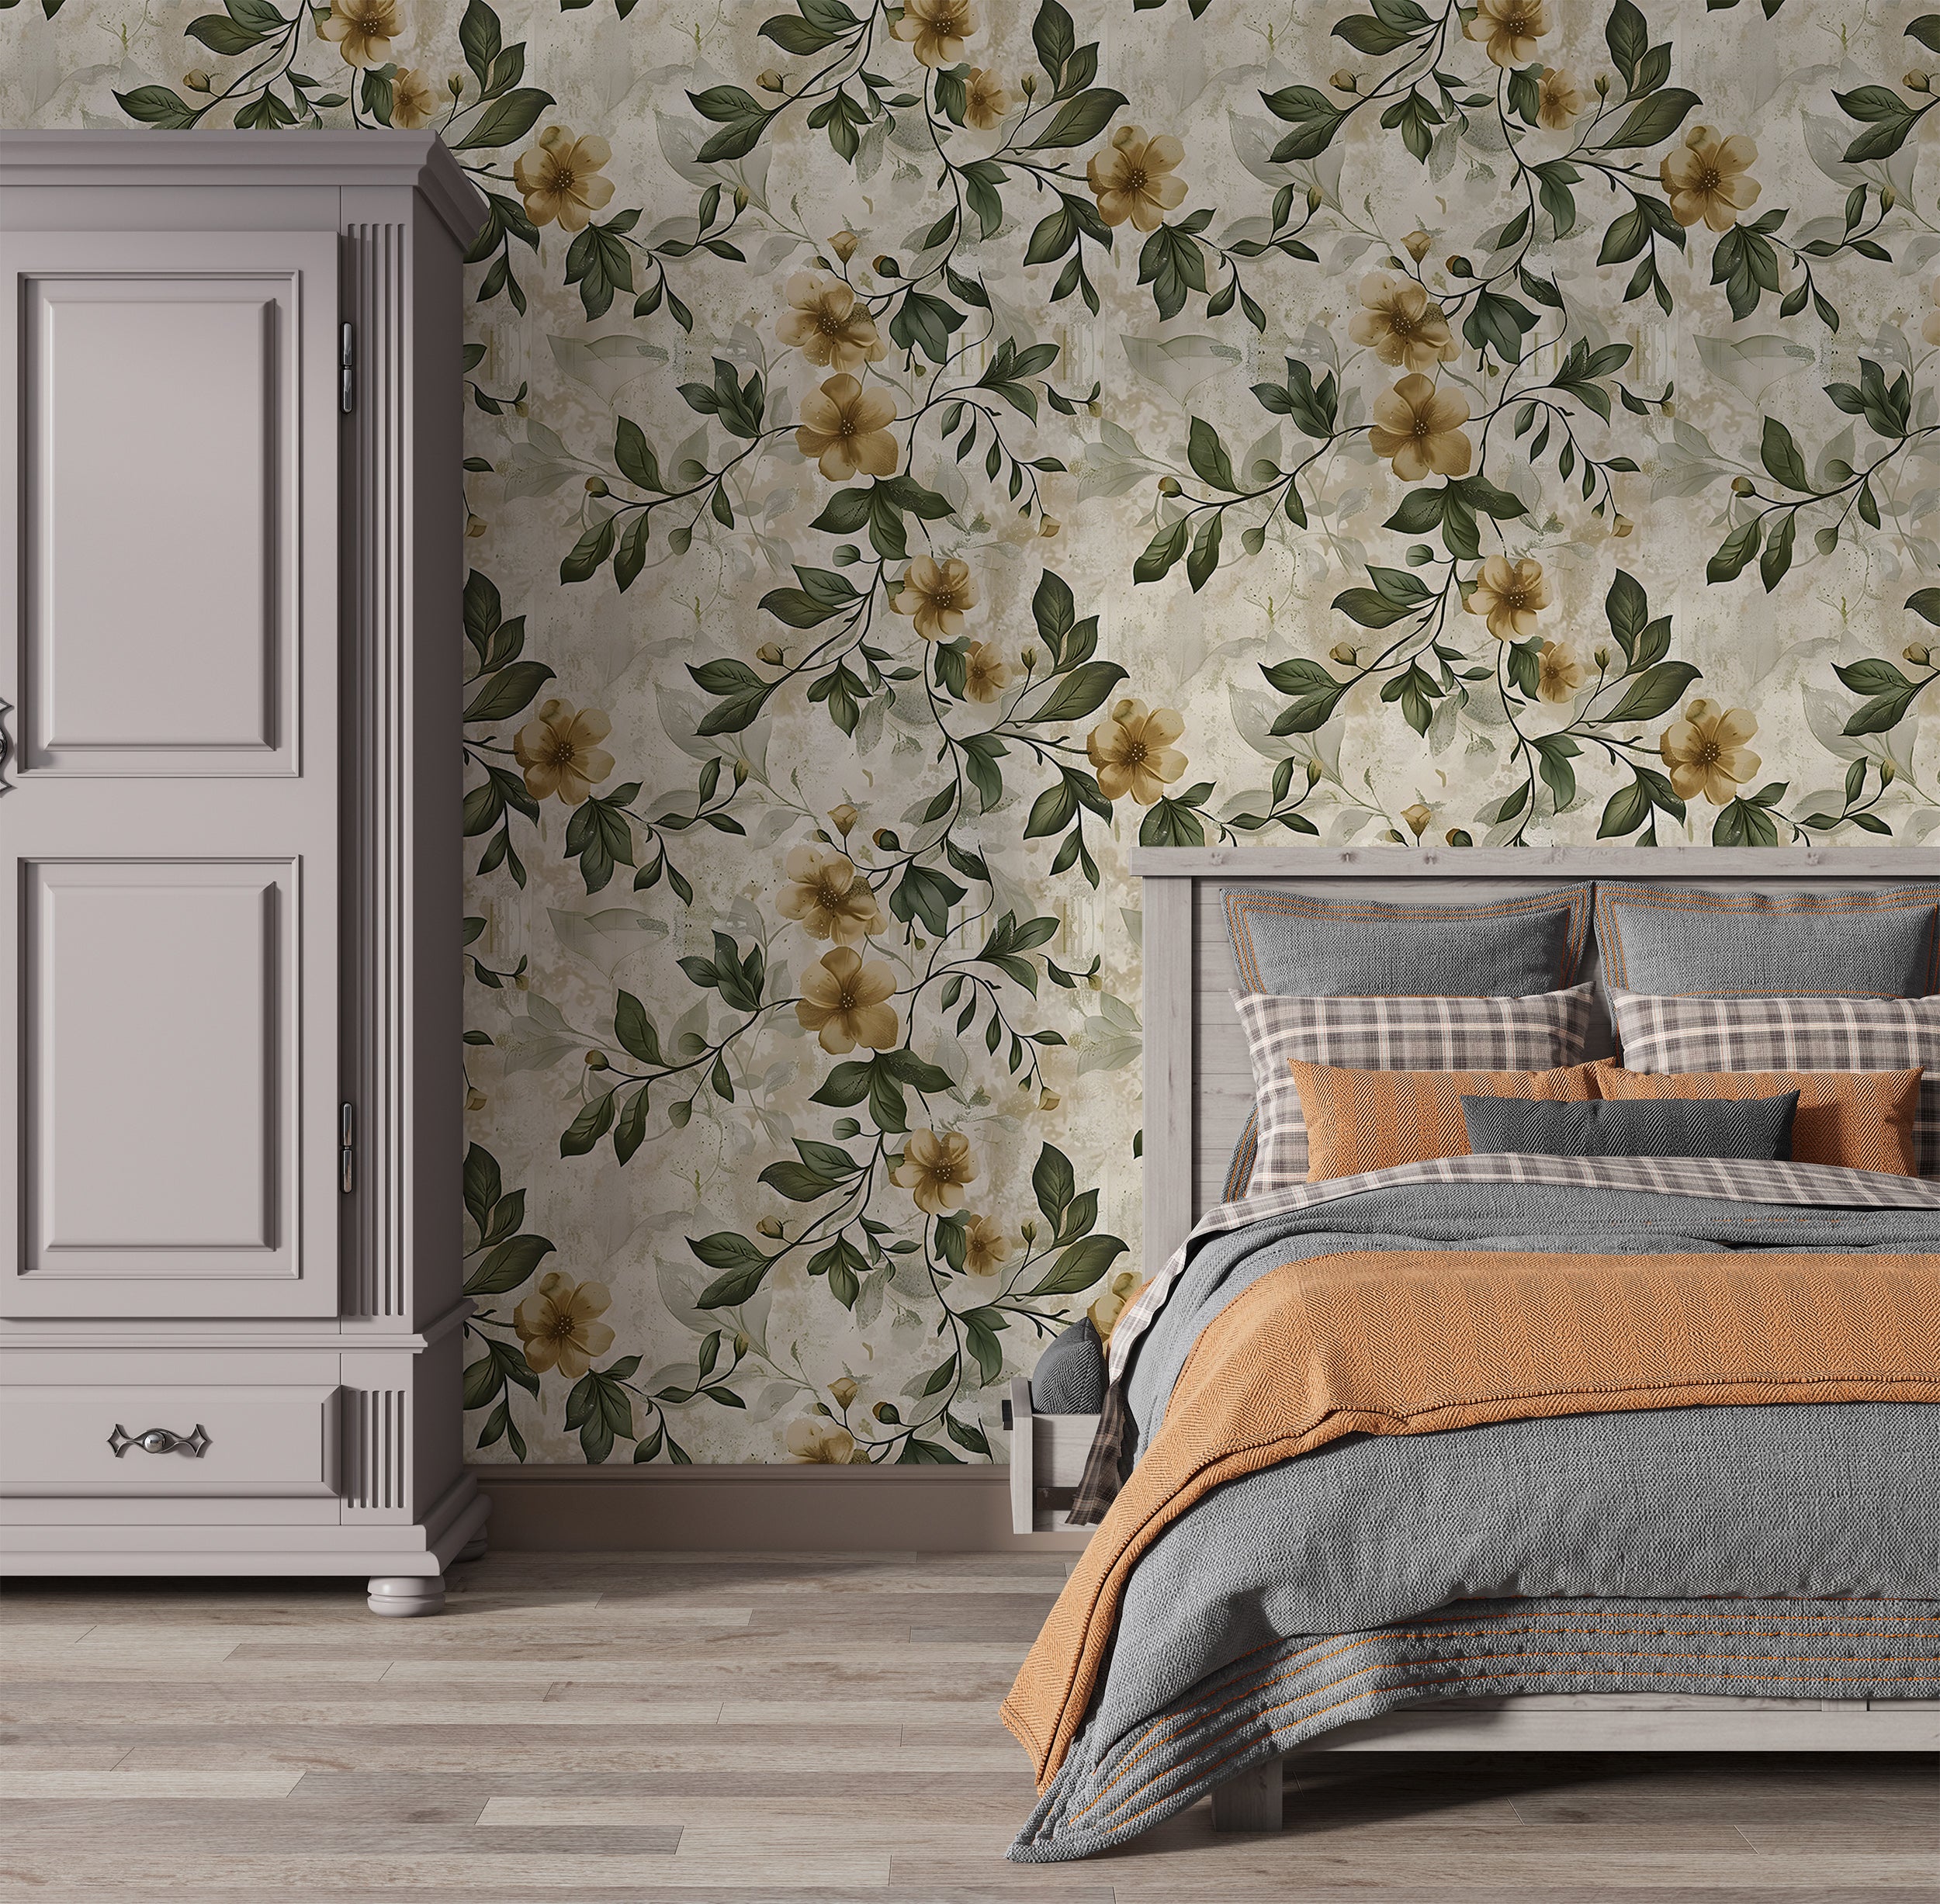 Rustic Beige and Green Floral Wallpaper, Vintage Peel and Stick Botanical Wall Decal, Removable Flowers and Leaves Old Style Wallpaper